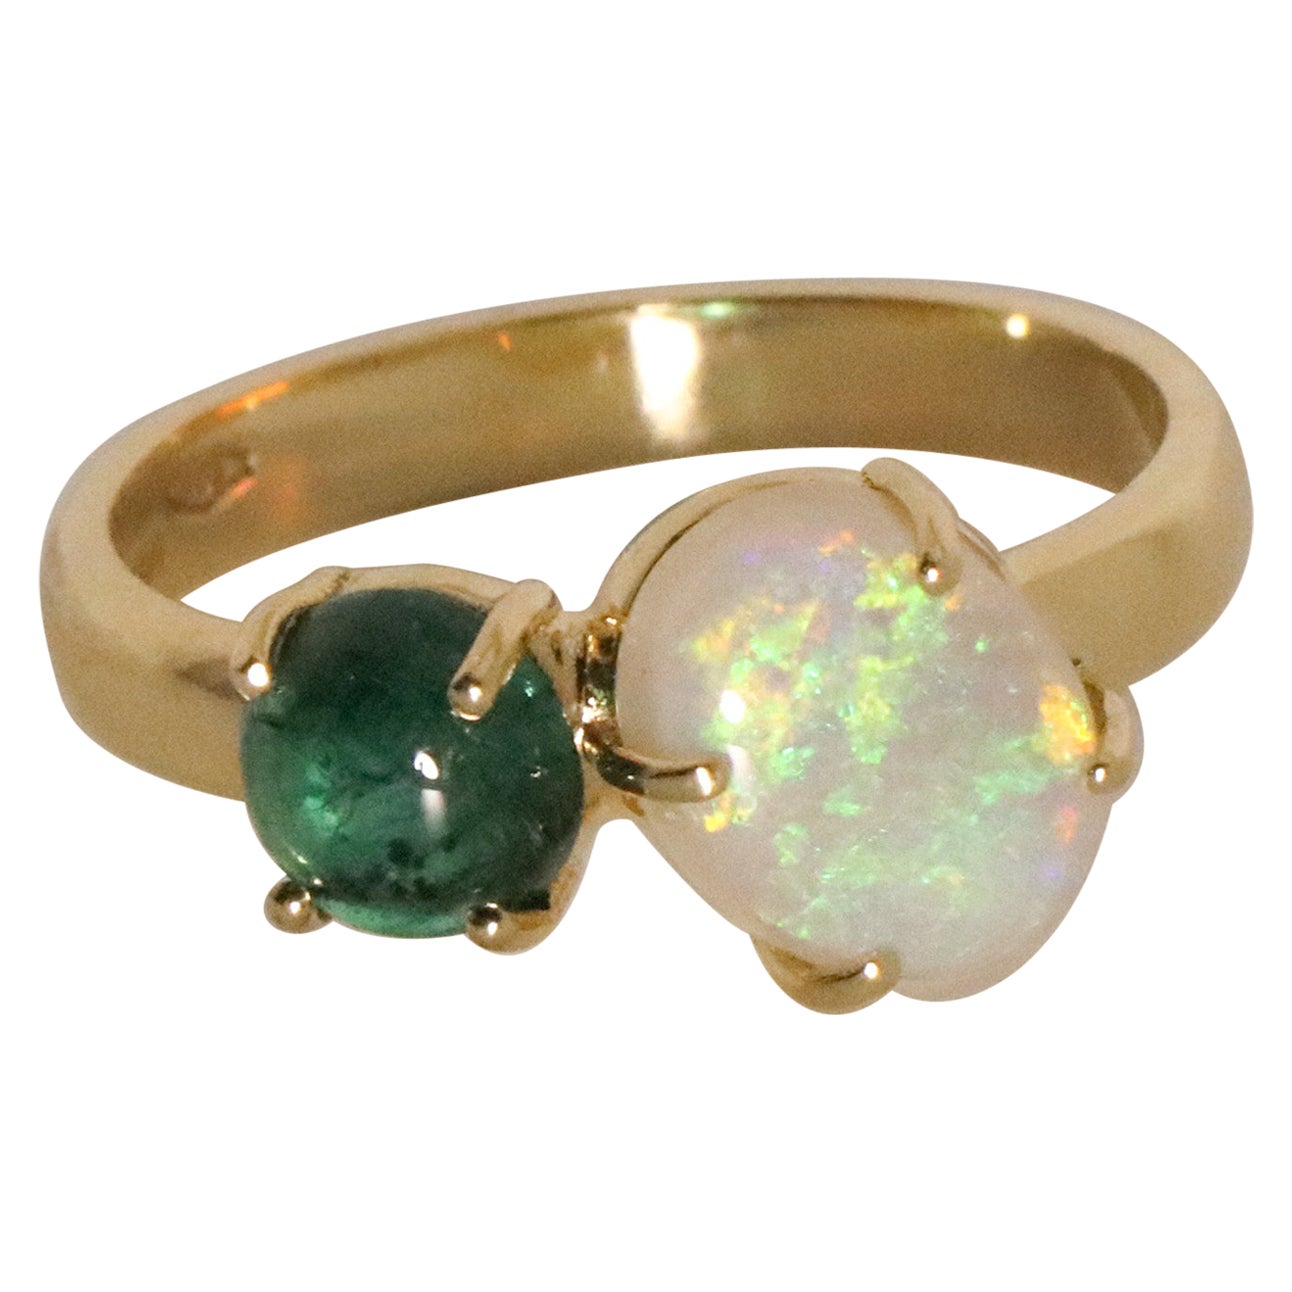 The Ines ring is made of 18 karat yellow gold and features a round cabochon cut natural emerald around 0.8 carats, diameter 5.9, depth 3.05 mm and an high quality oval cabochon cut Australian opal around 1.4 carats, 9.21*7.1*3.4 mm. The total weight